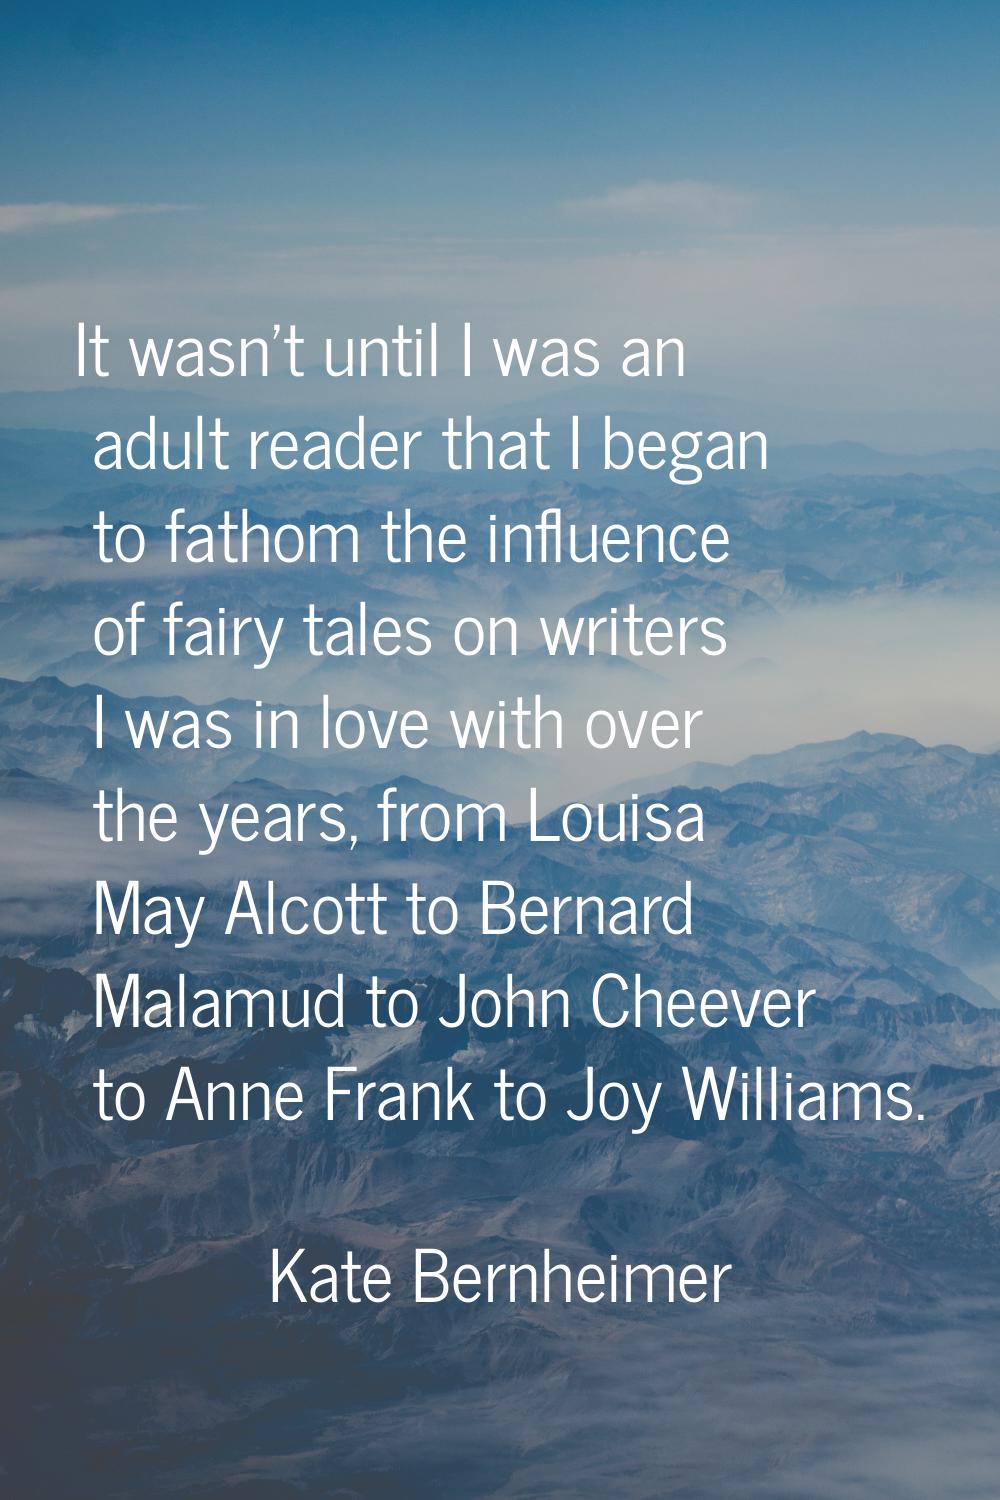 It wasn't until I was an adult reader that I began to fathom the influence of fairy tales on writer